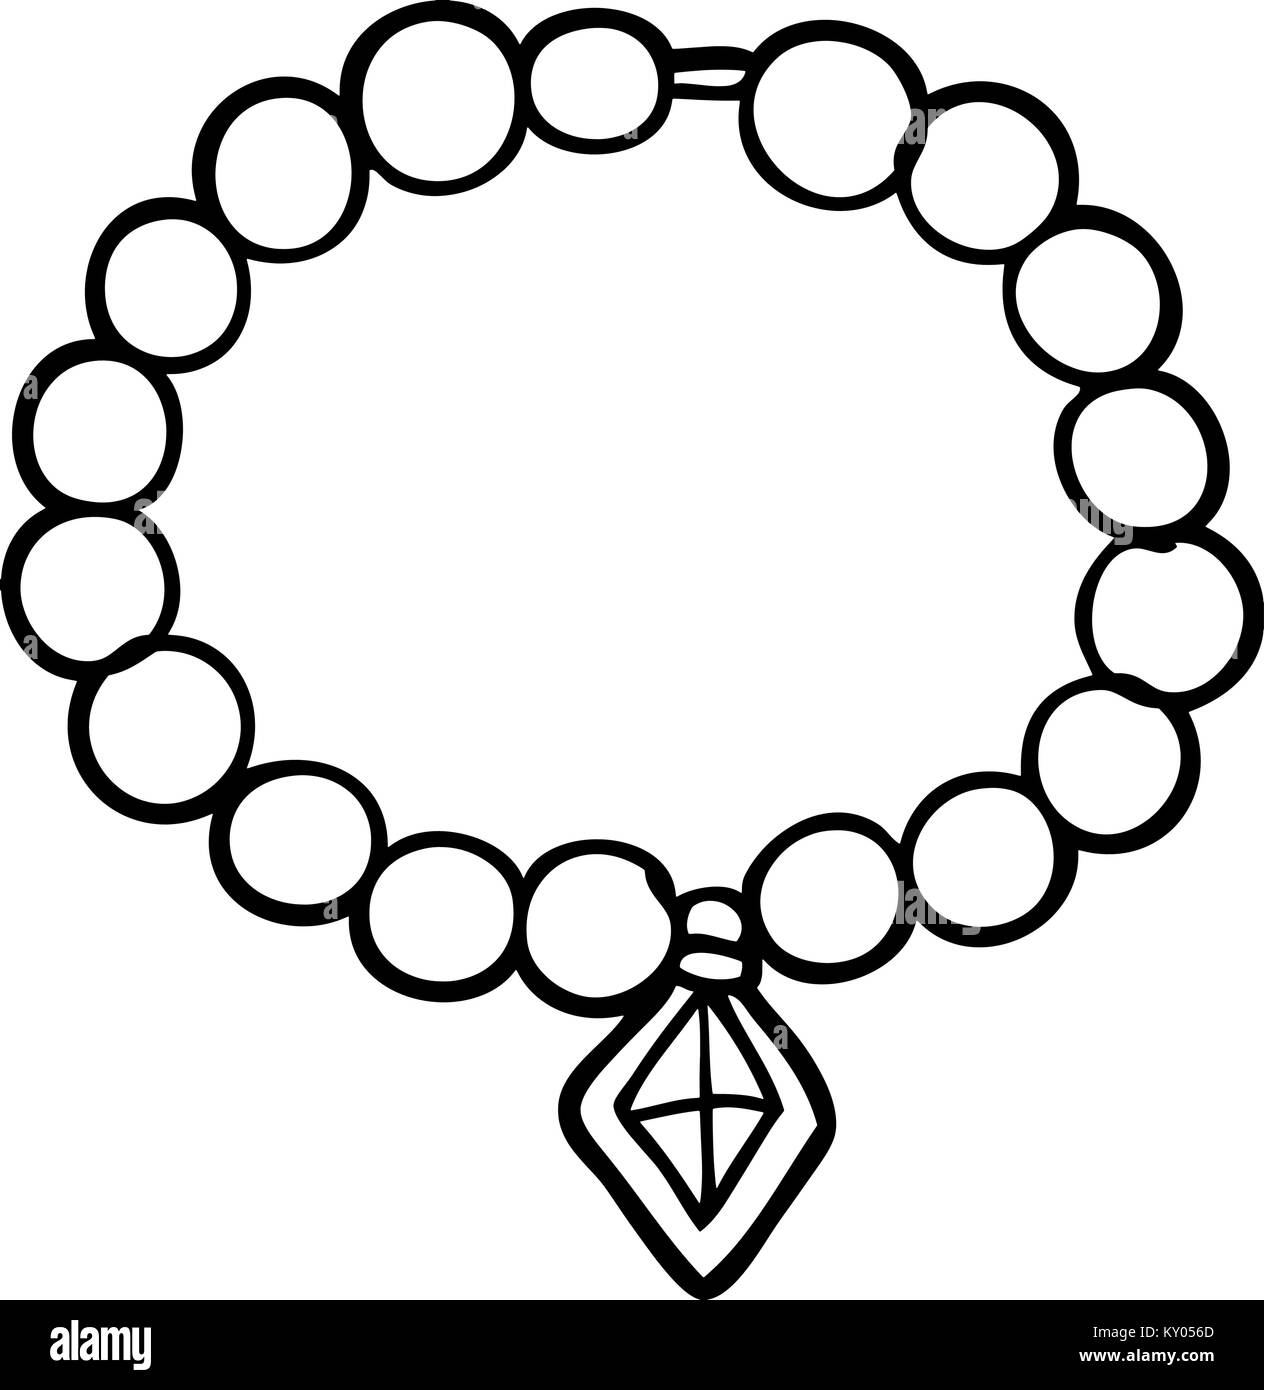 Pearl Necklace Vector Images over 7100